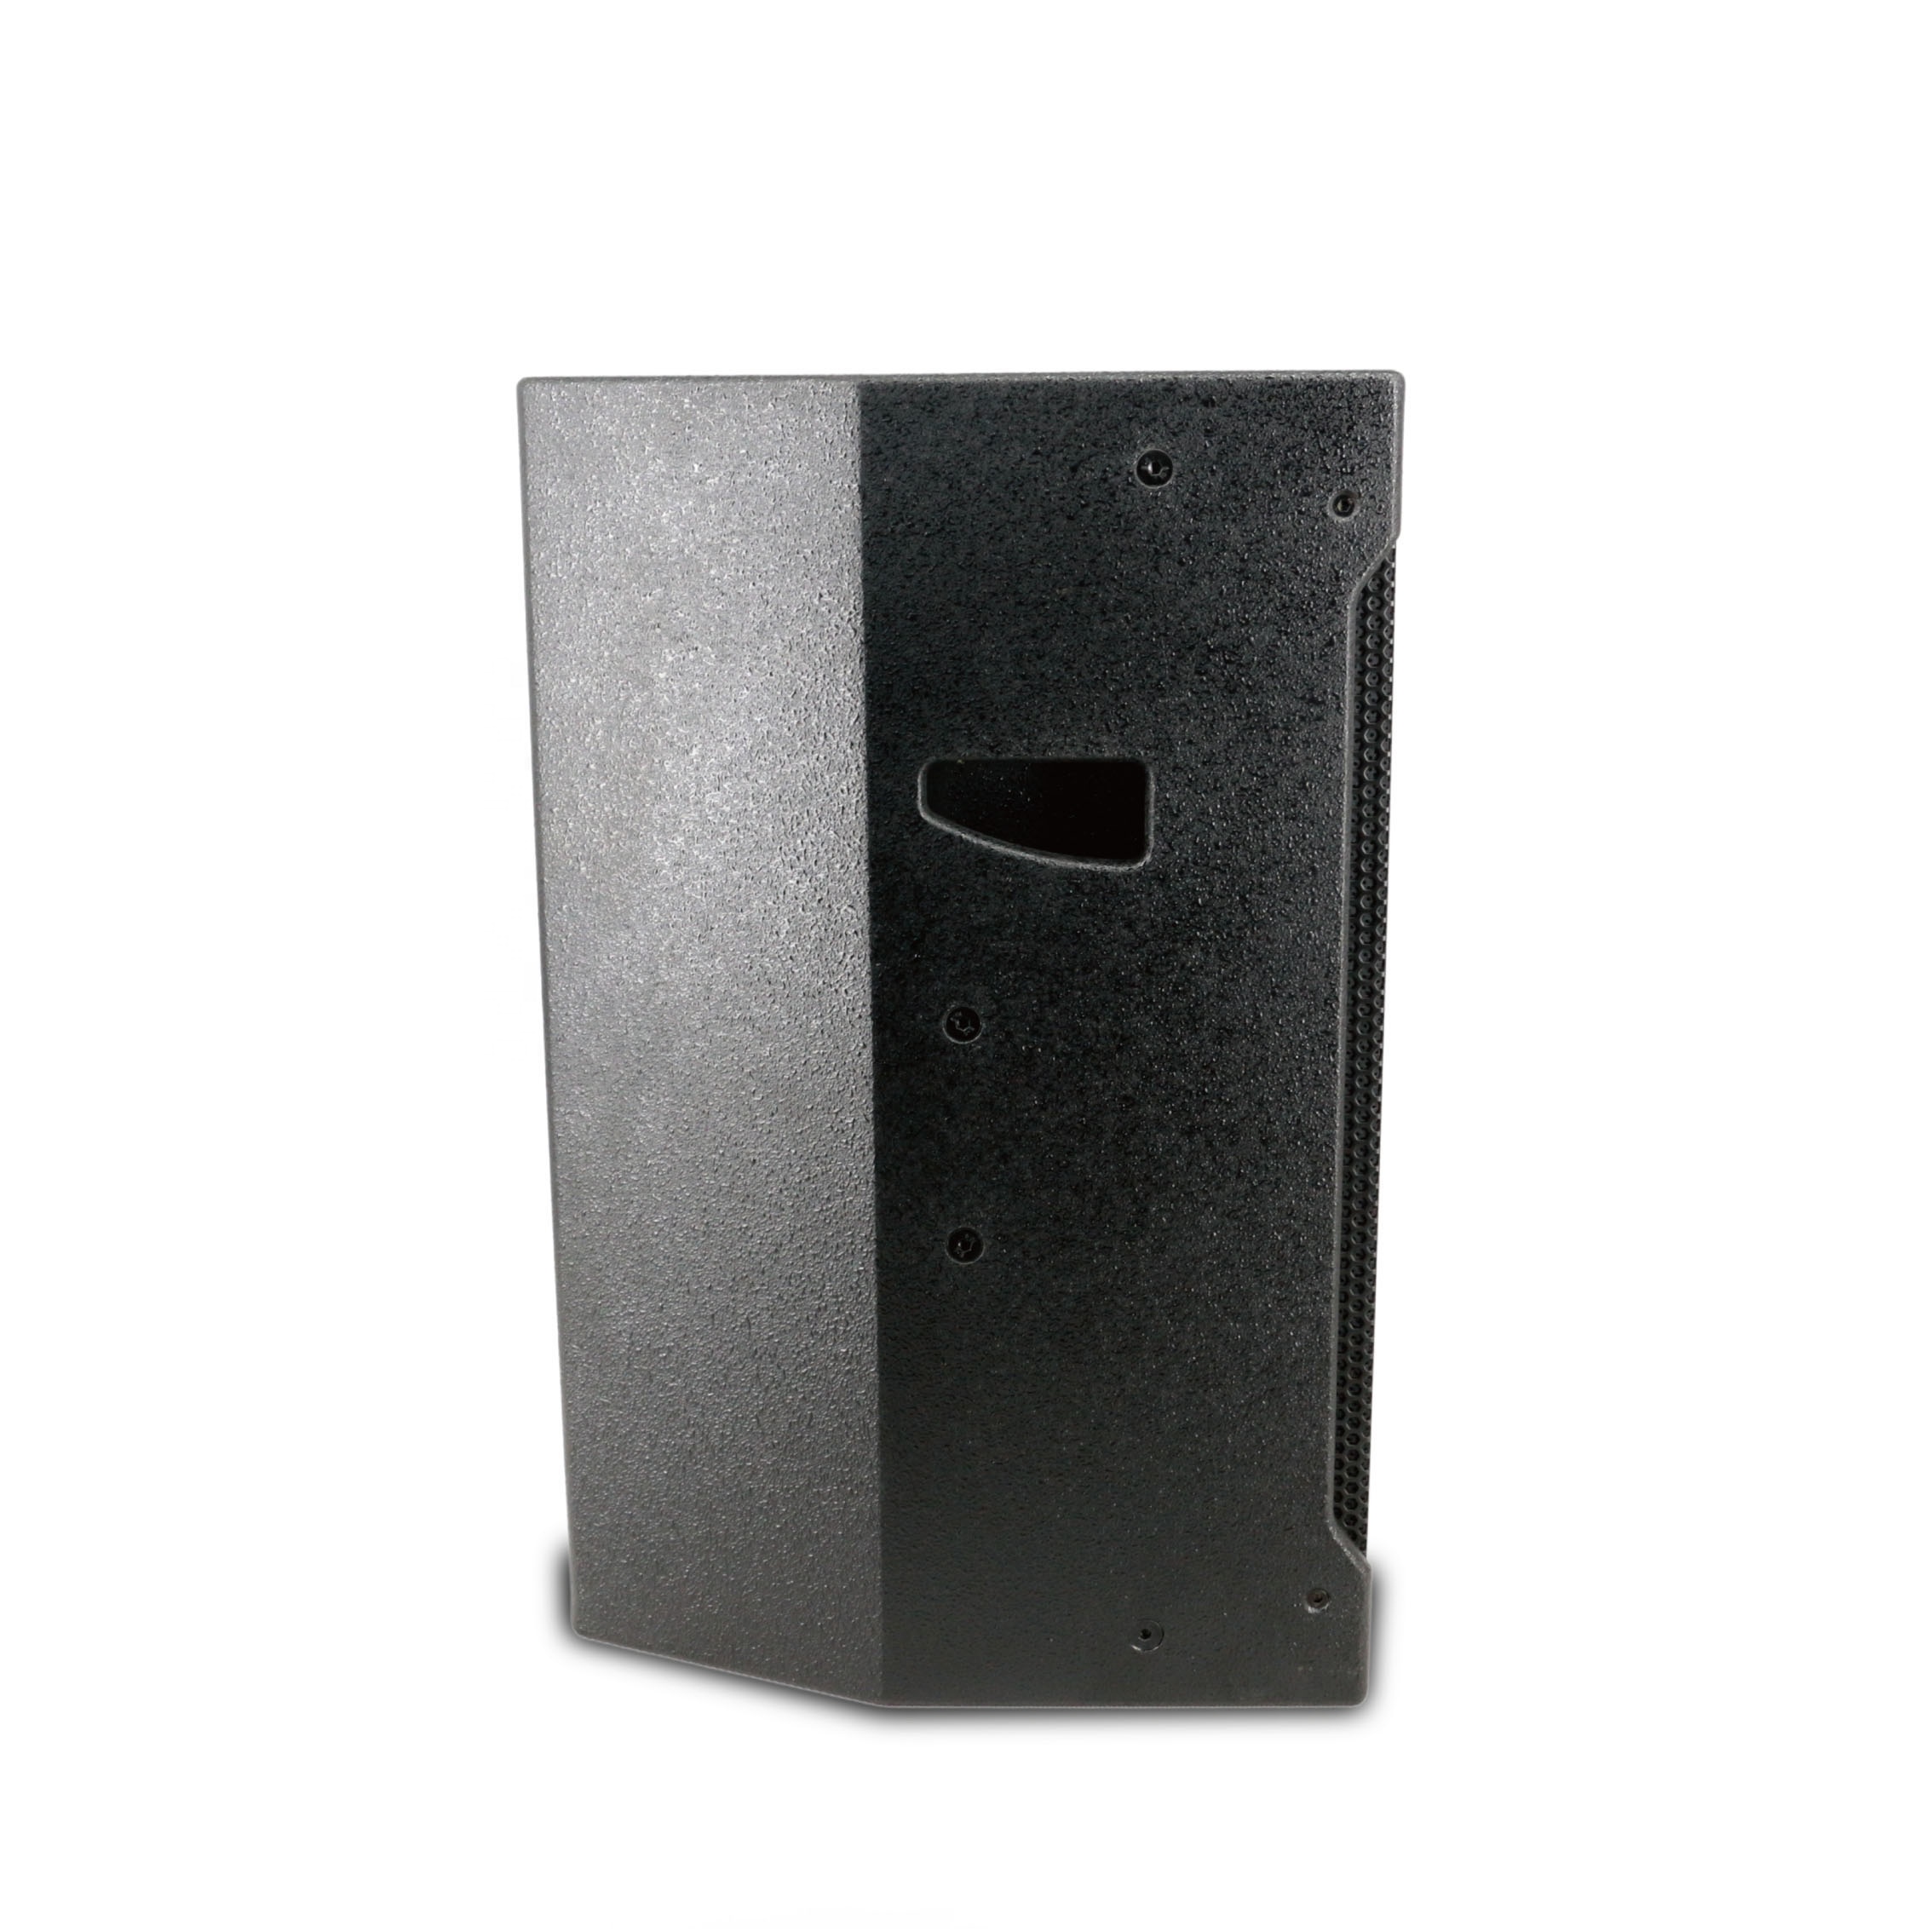 12 inch 300 Watt Pro Audio speaker for meeting room and stage